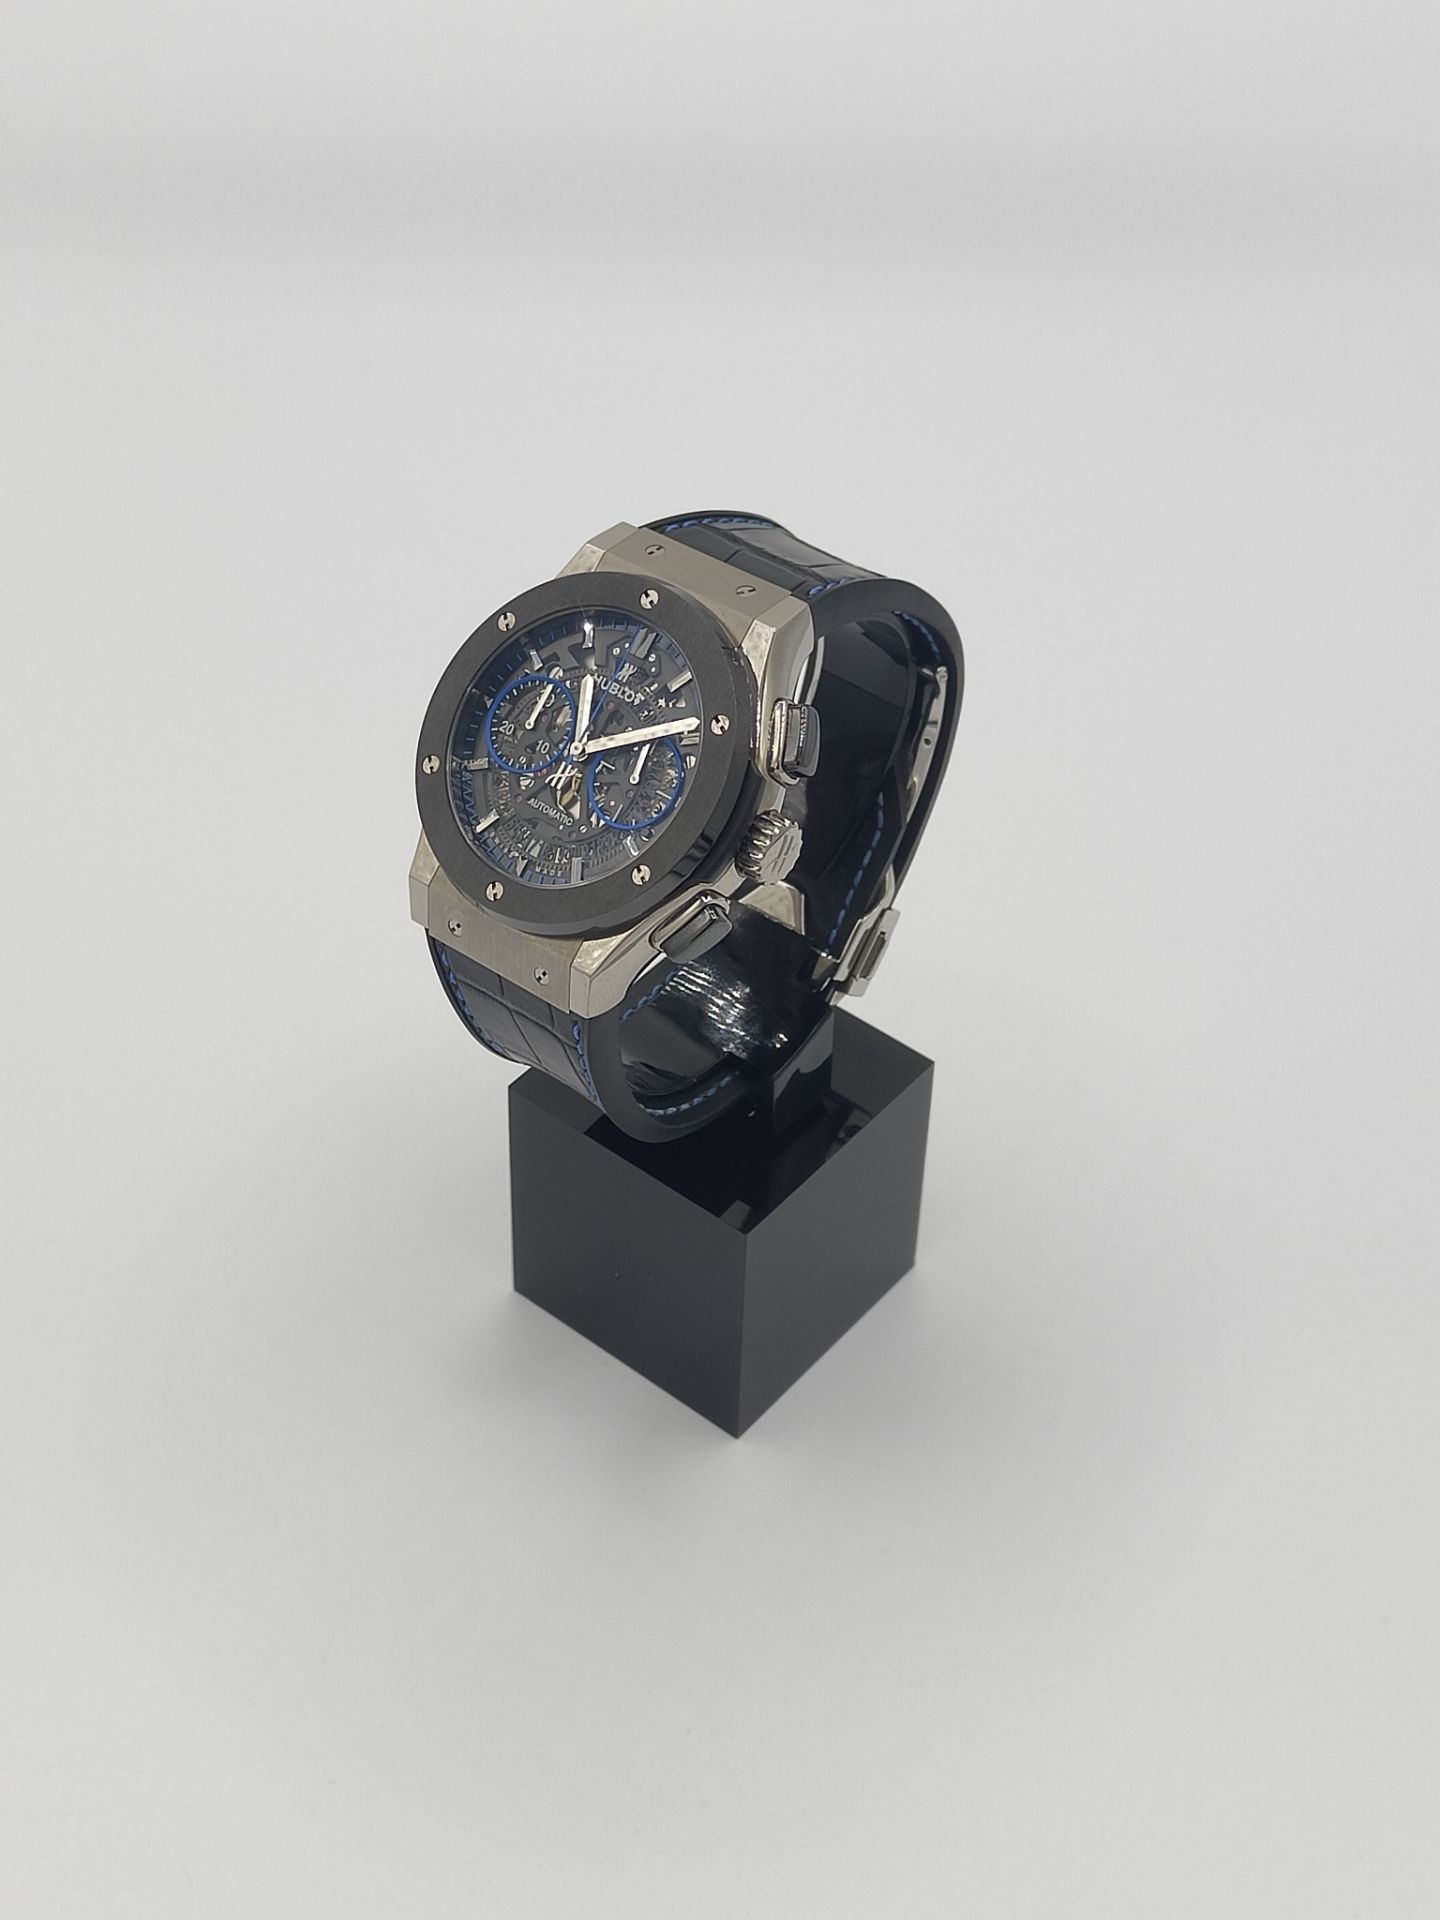 Hublot Classic Fusion Special Edition Watch - Image 3 of 11